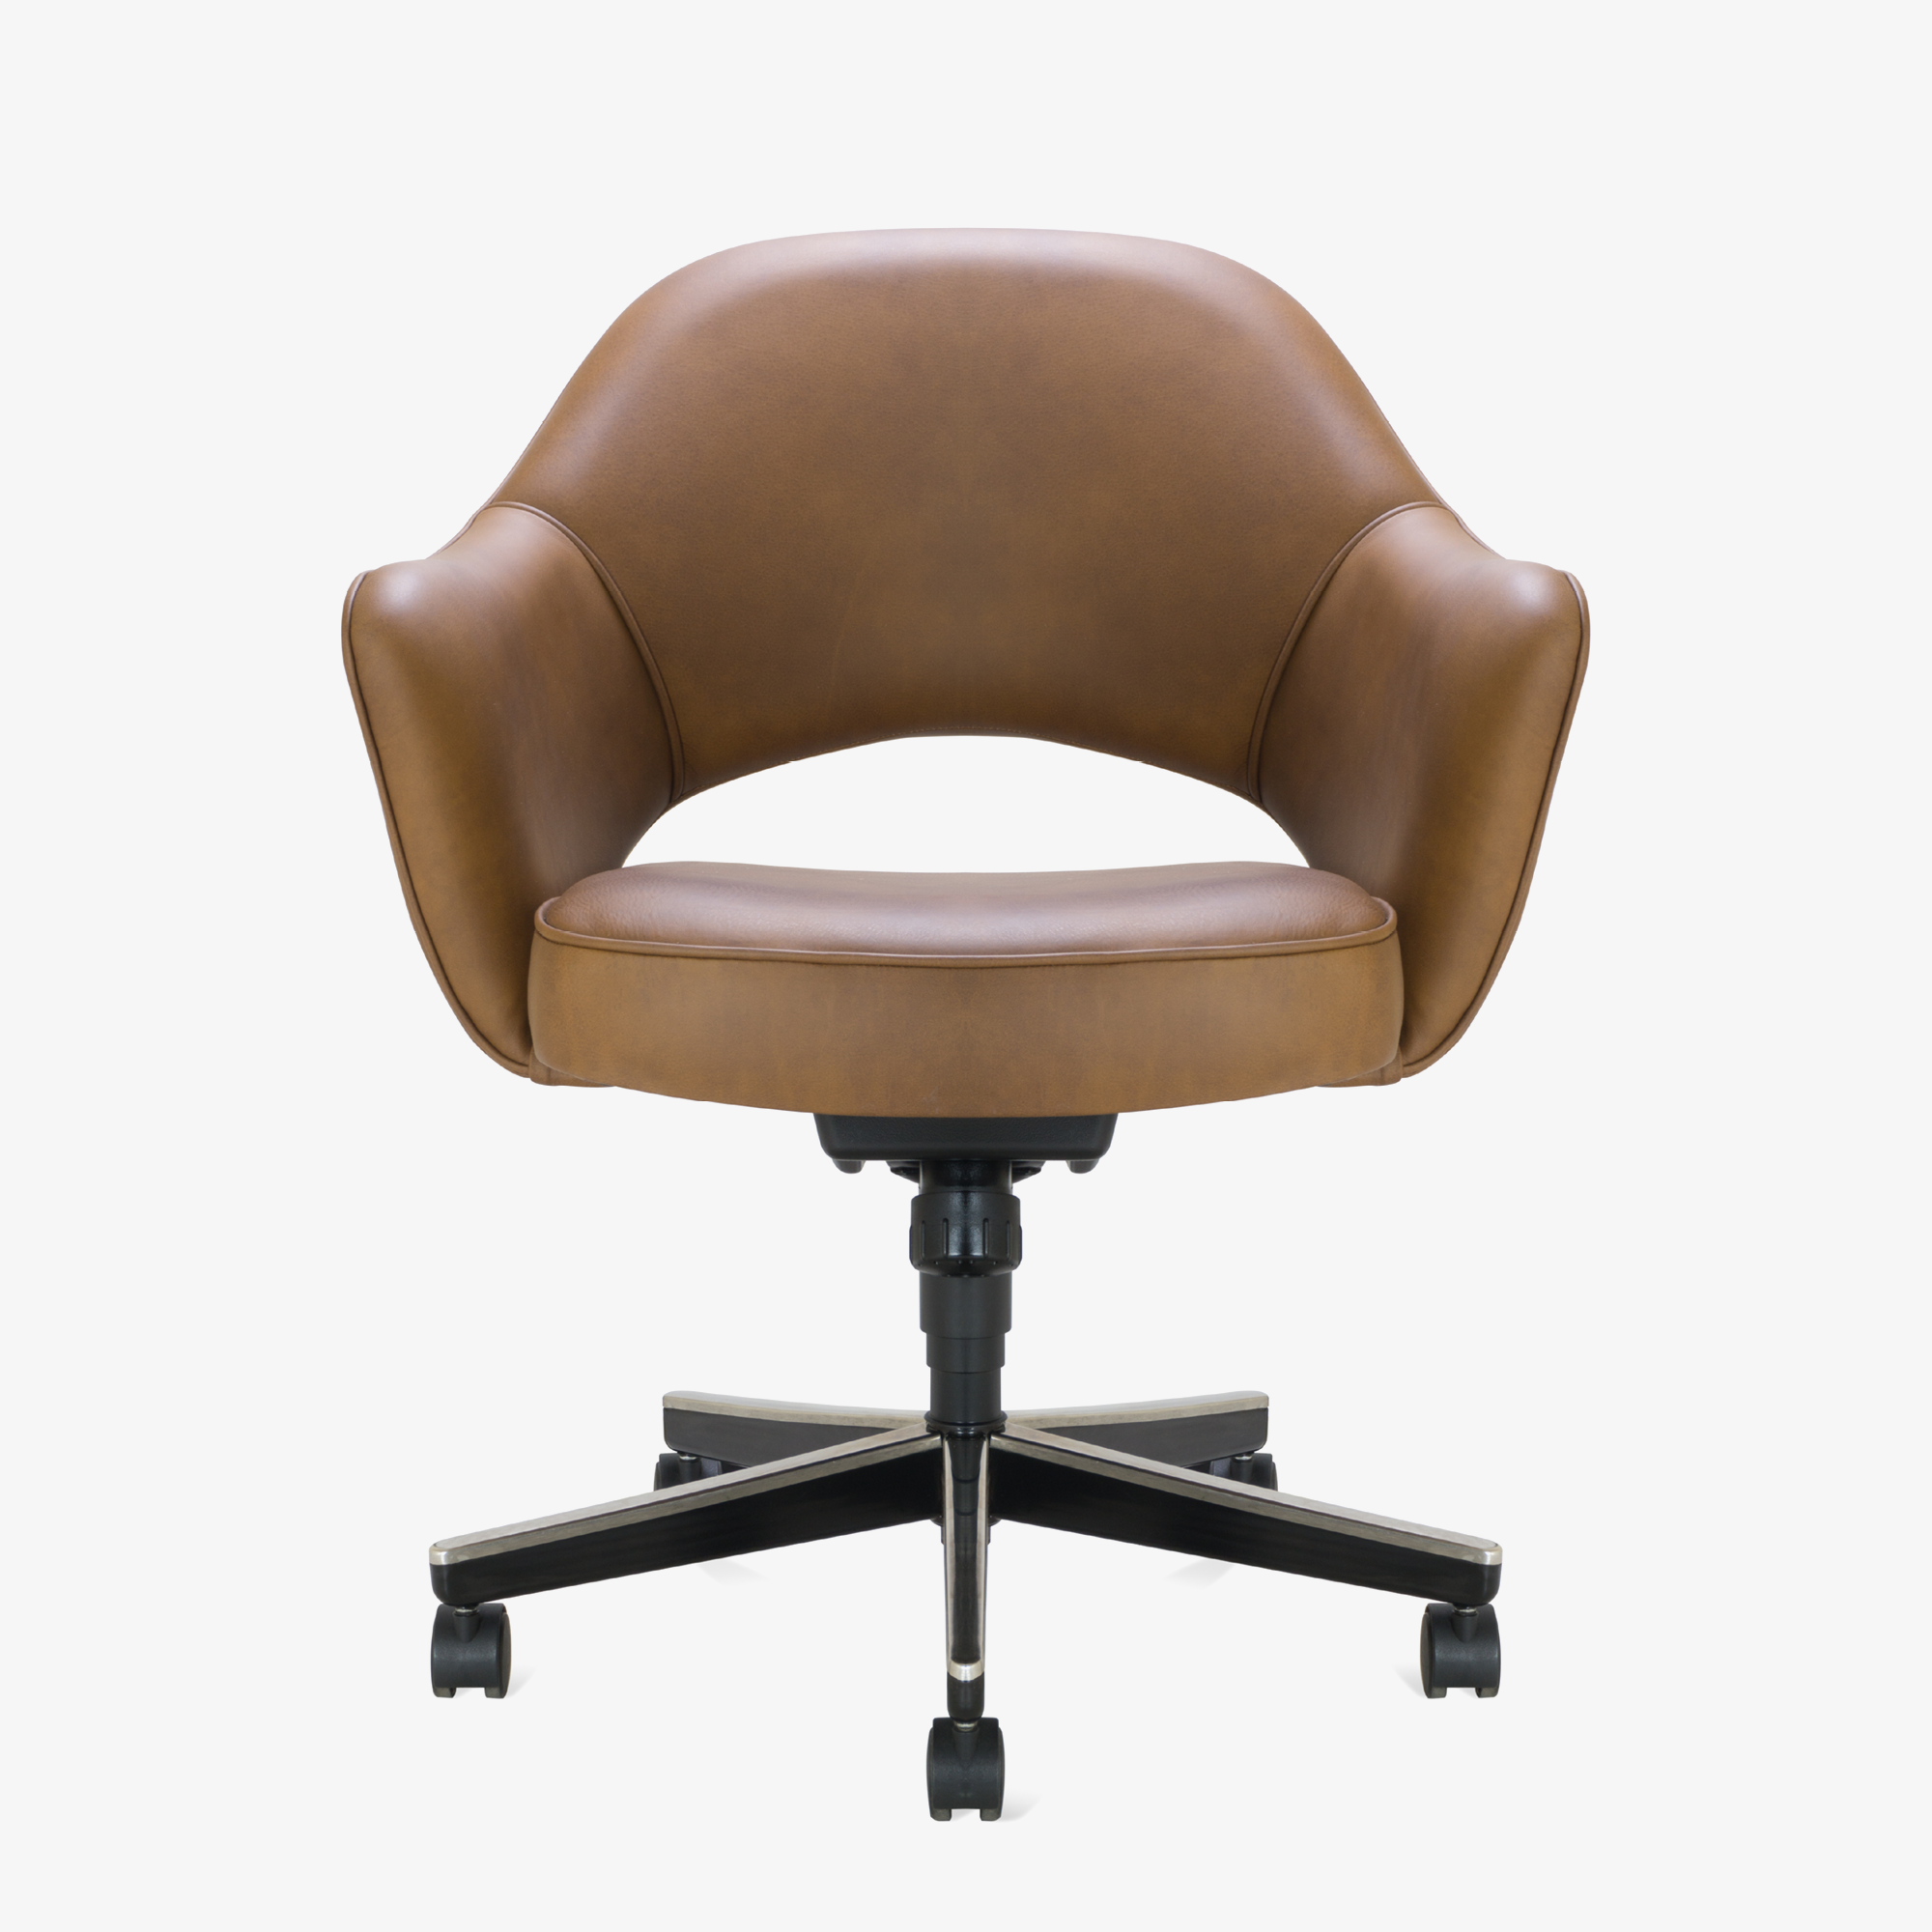 Saarinen Executive Arm Chair in Saddle Leather, Swivel Base.png